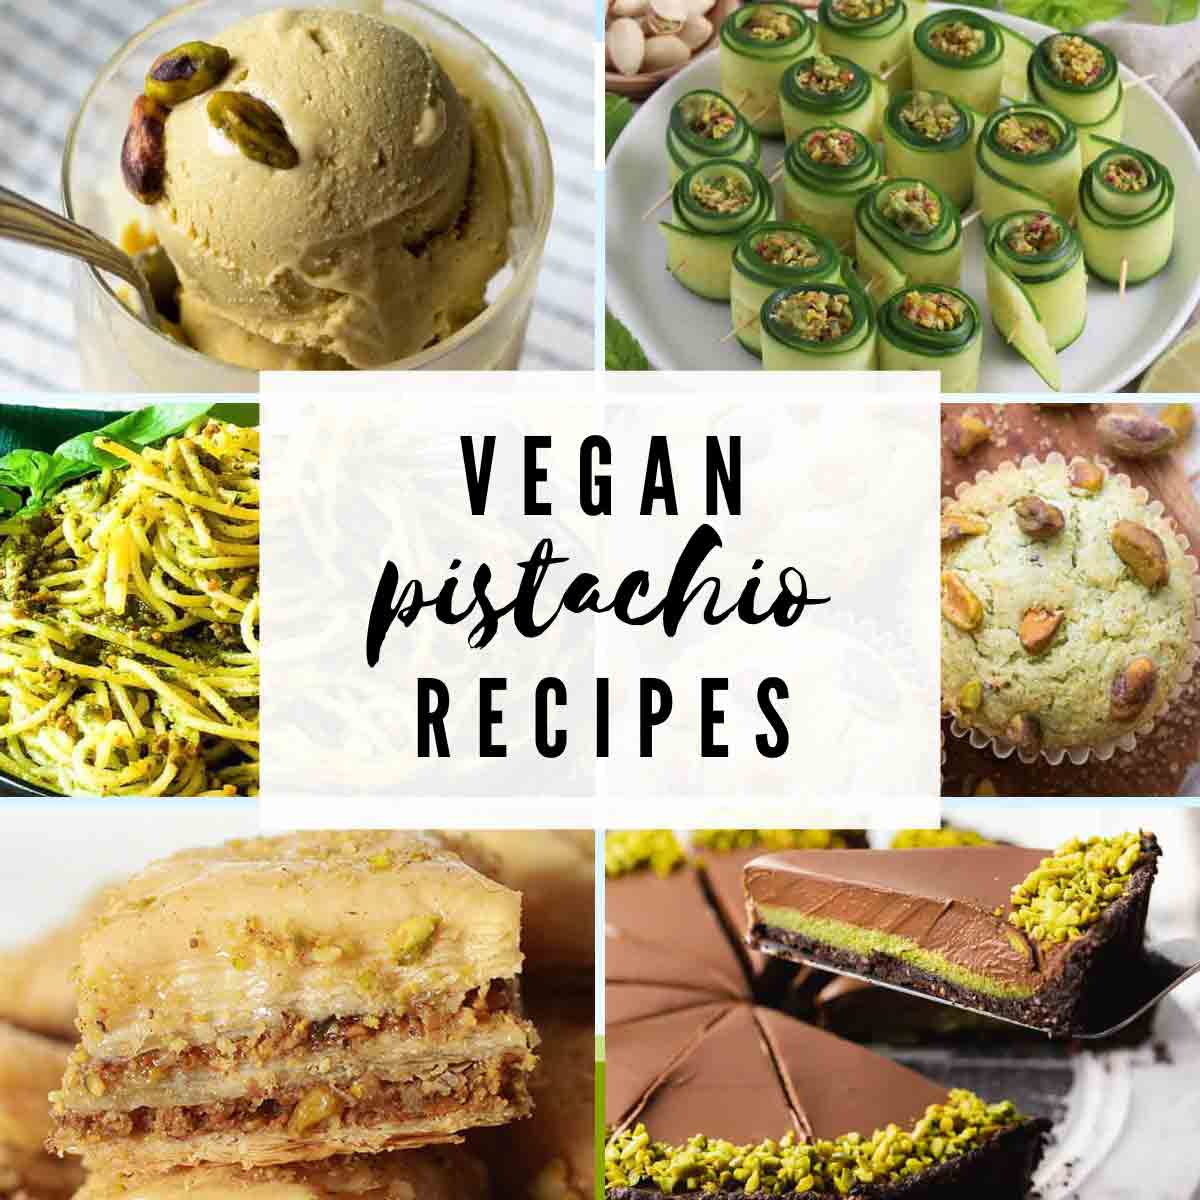 Food Images With Text Overlay That Reads Vegan Pistachio Recipes